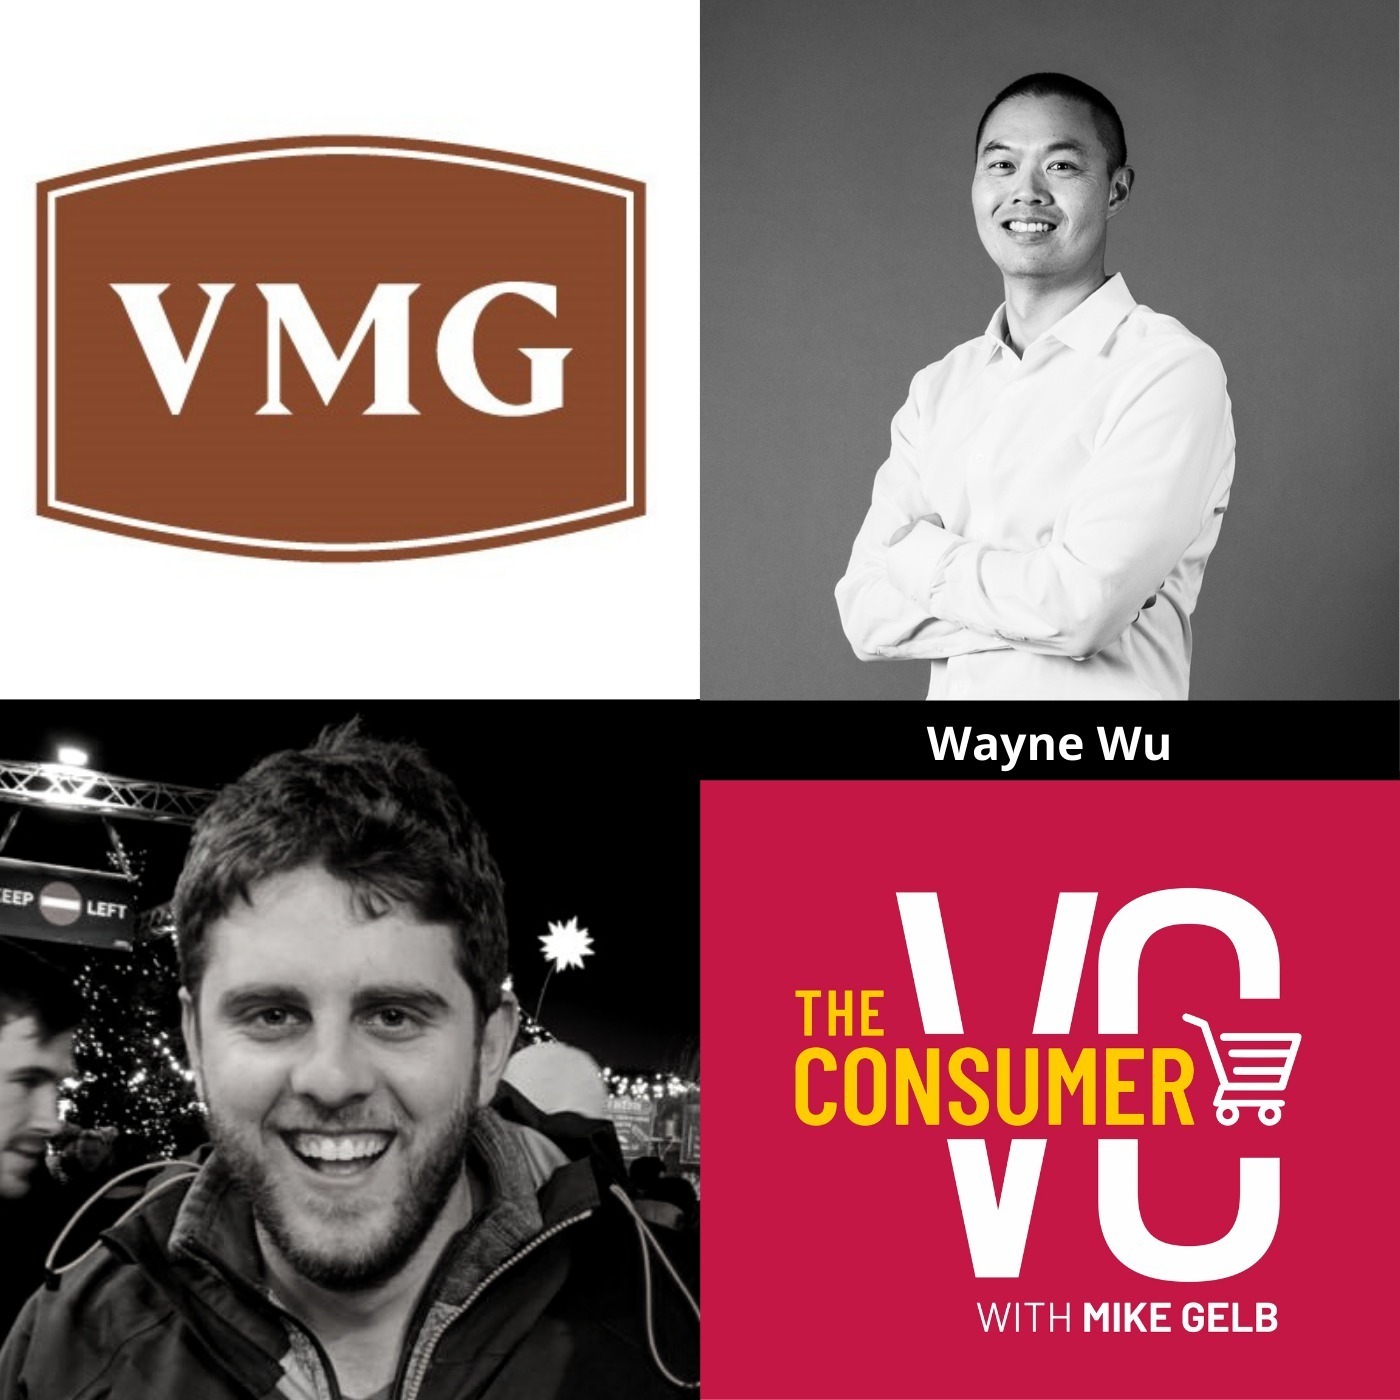 Wayne Wu (VMG) – His Ecosystem Approach, How He Builds Community In CPG, and Advice for Founders Located in Secondary Markets Image